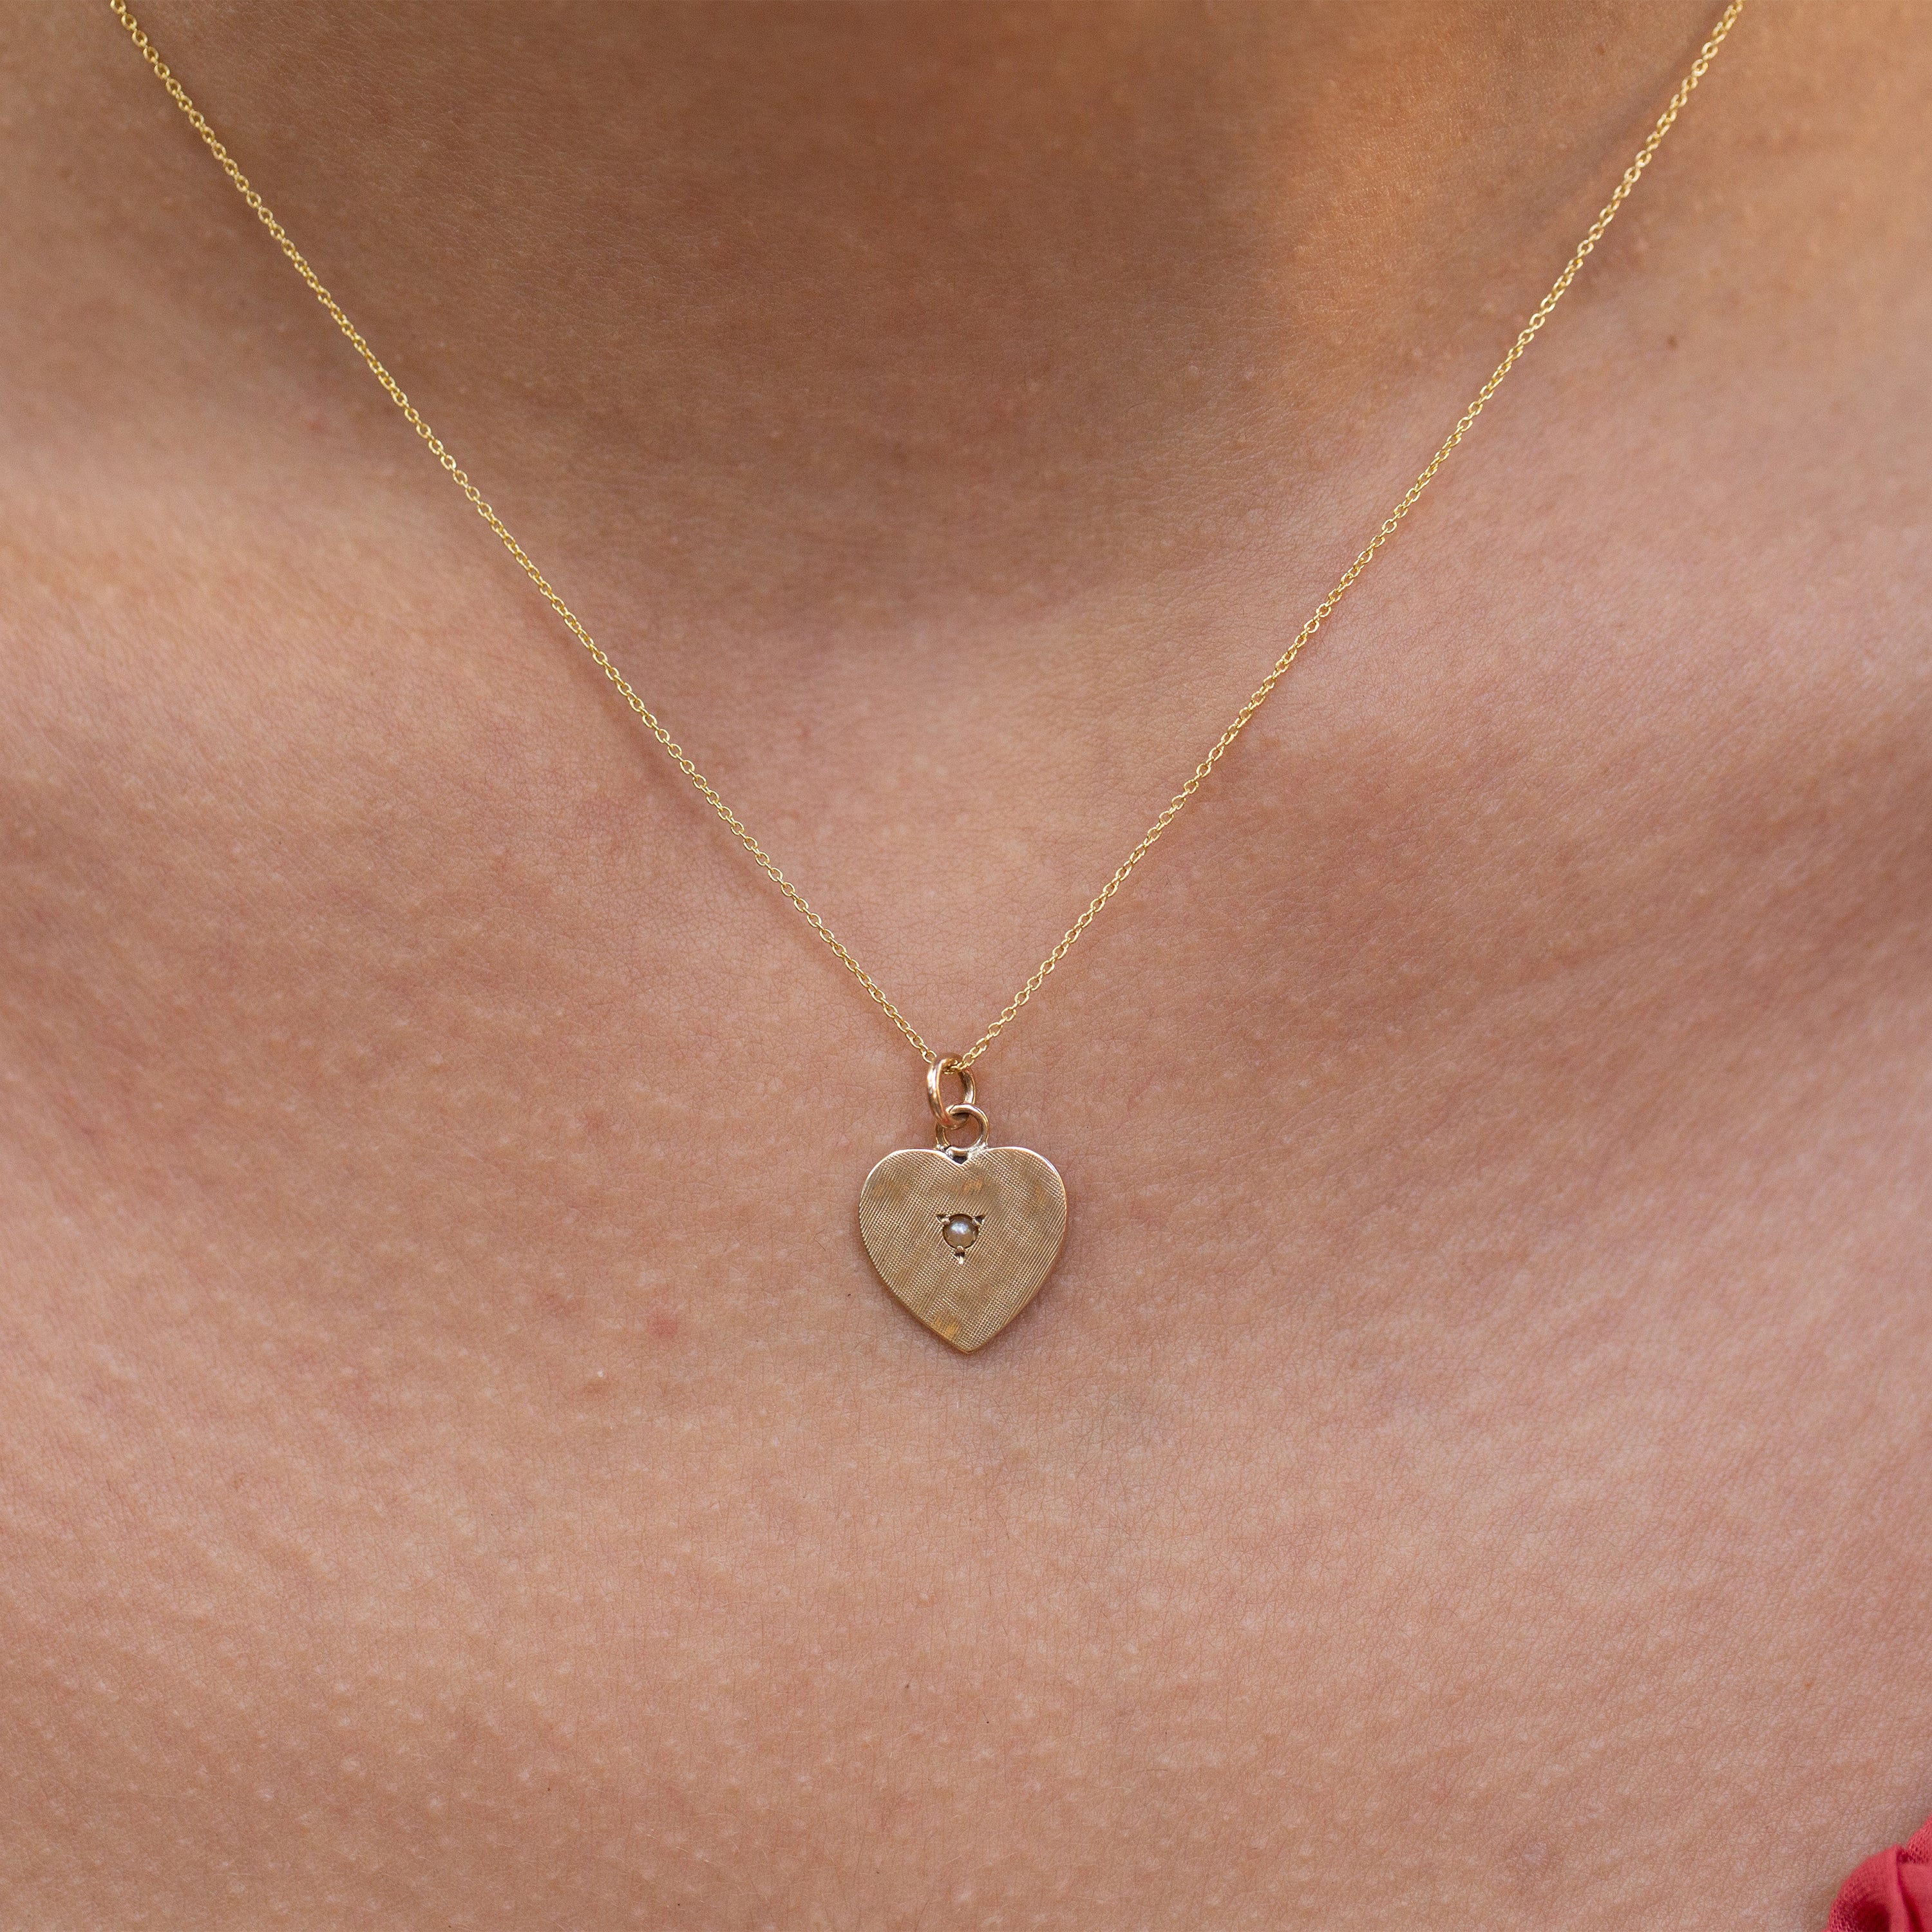 Pearl and Textured 14k Gold Heart Charm